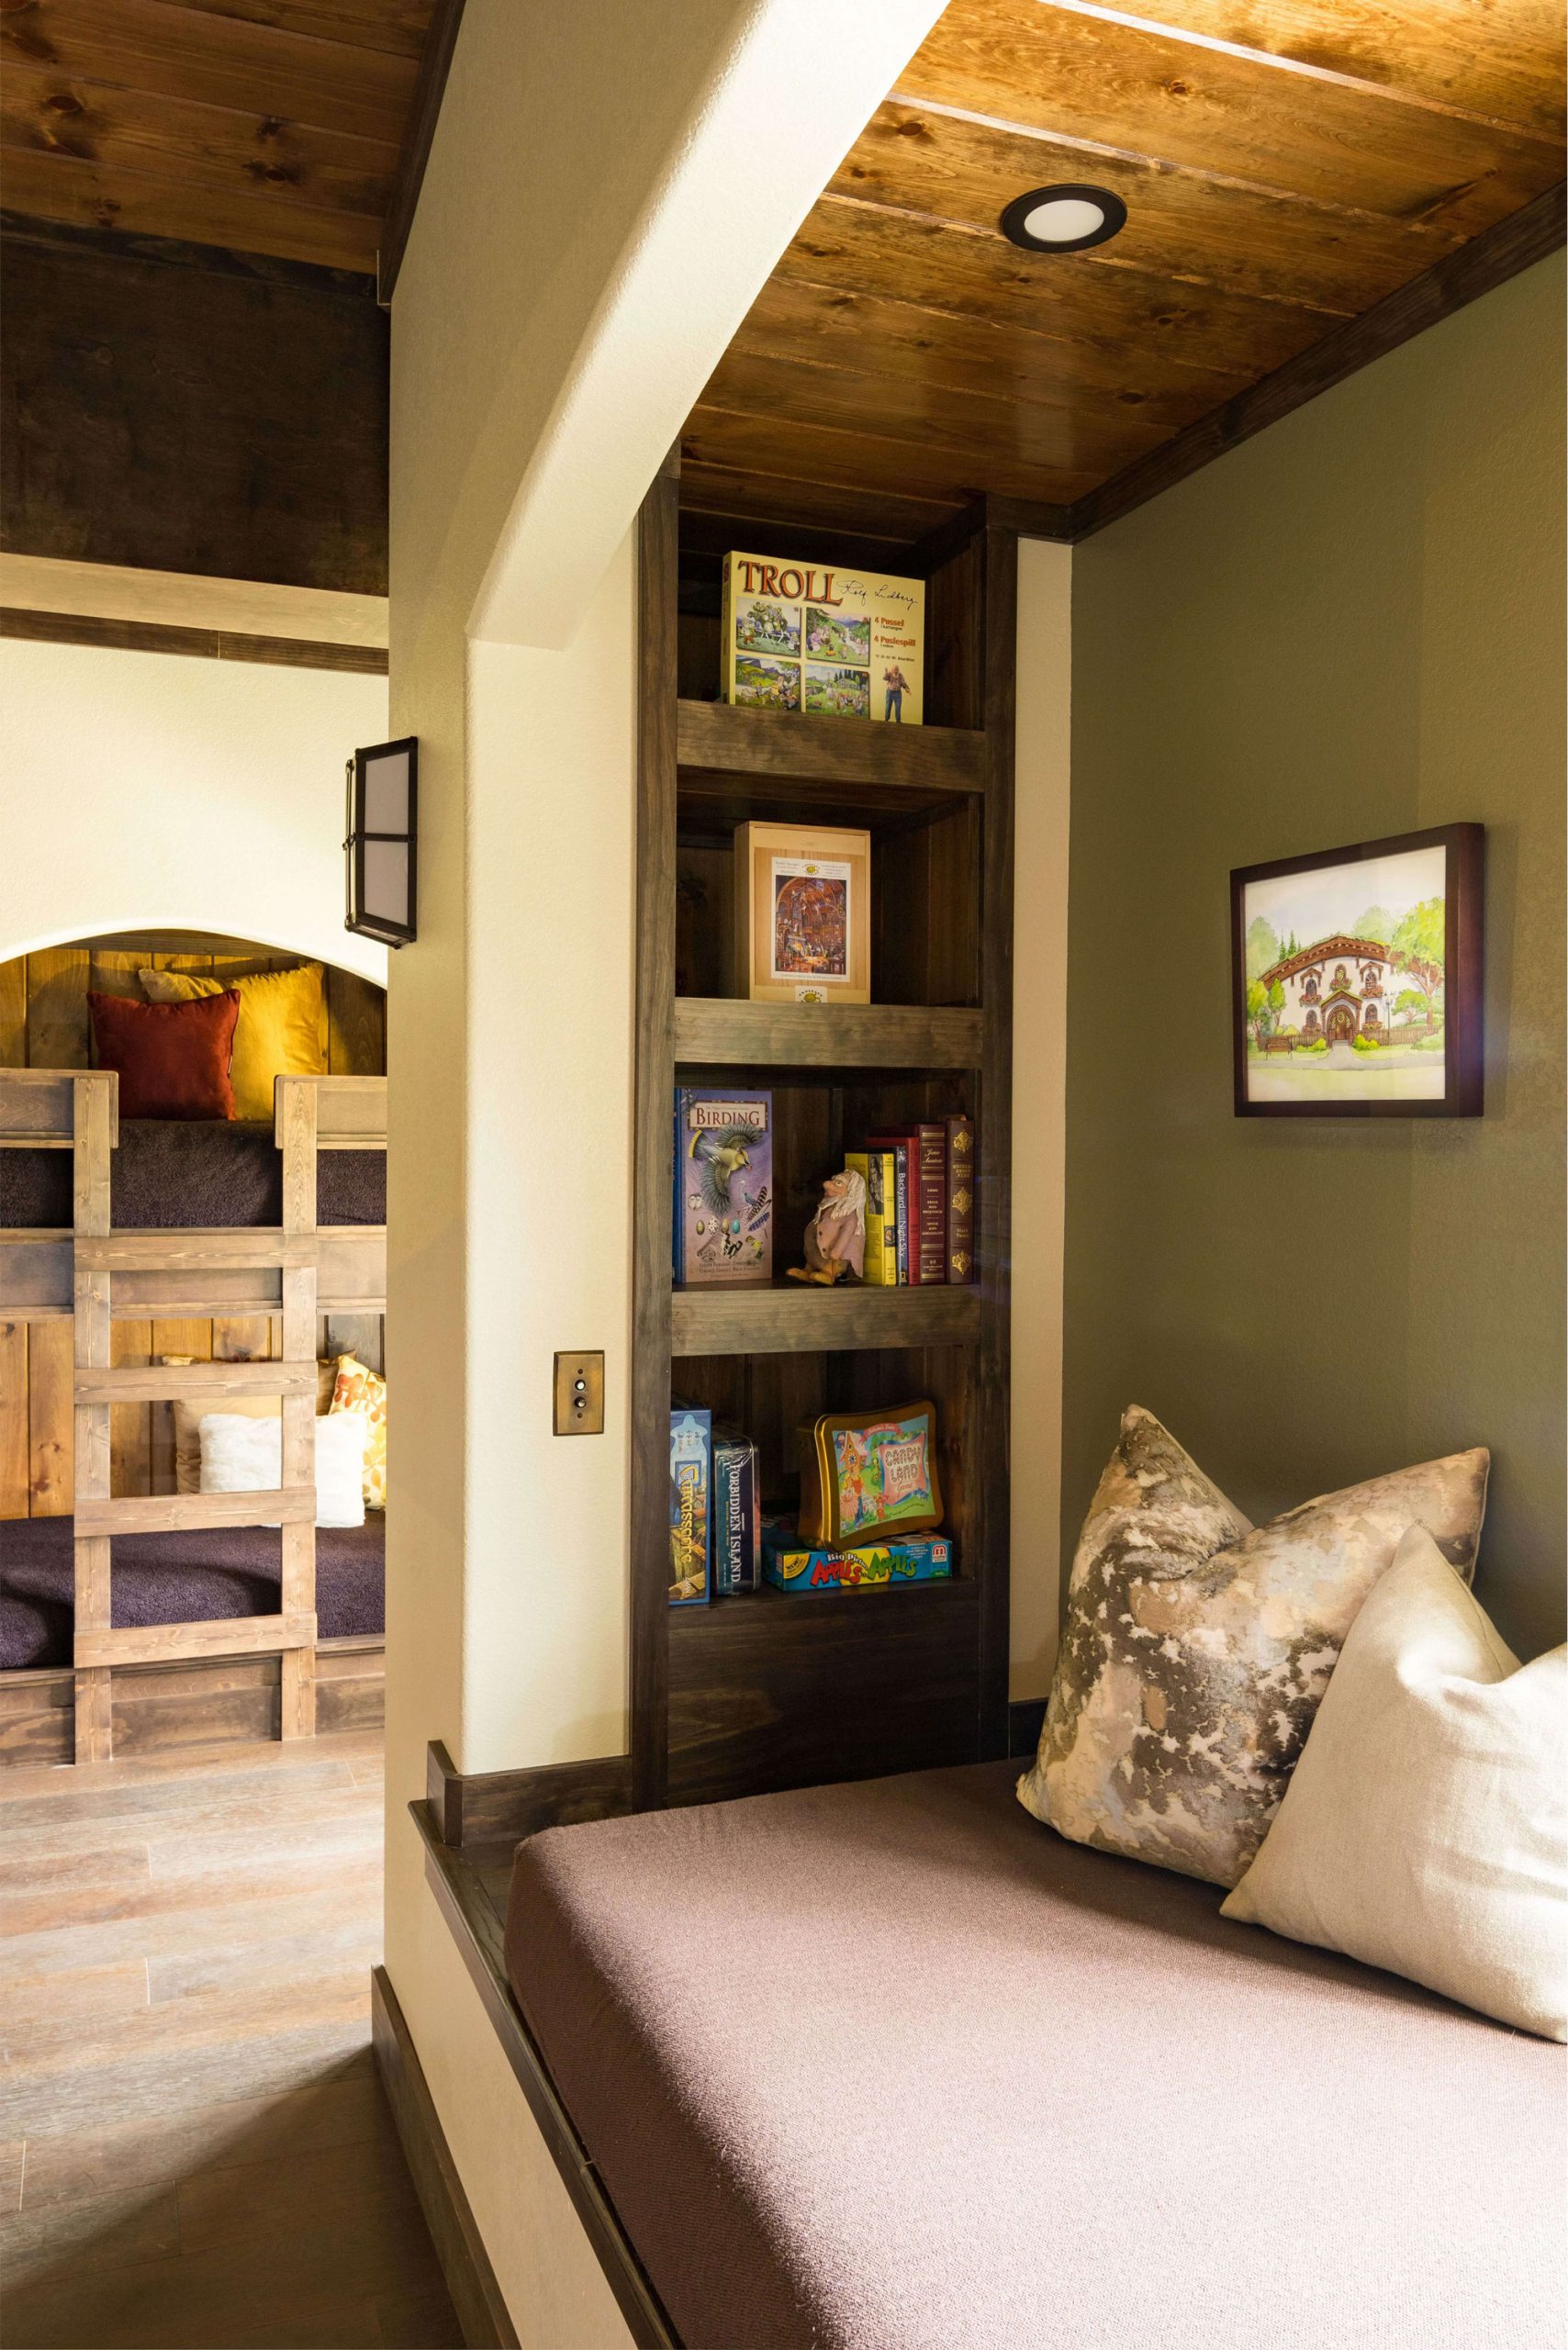 a daybed beside a bookshelf filled with games and books for the family to enjoy while staying overnight